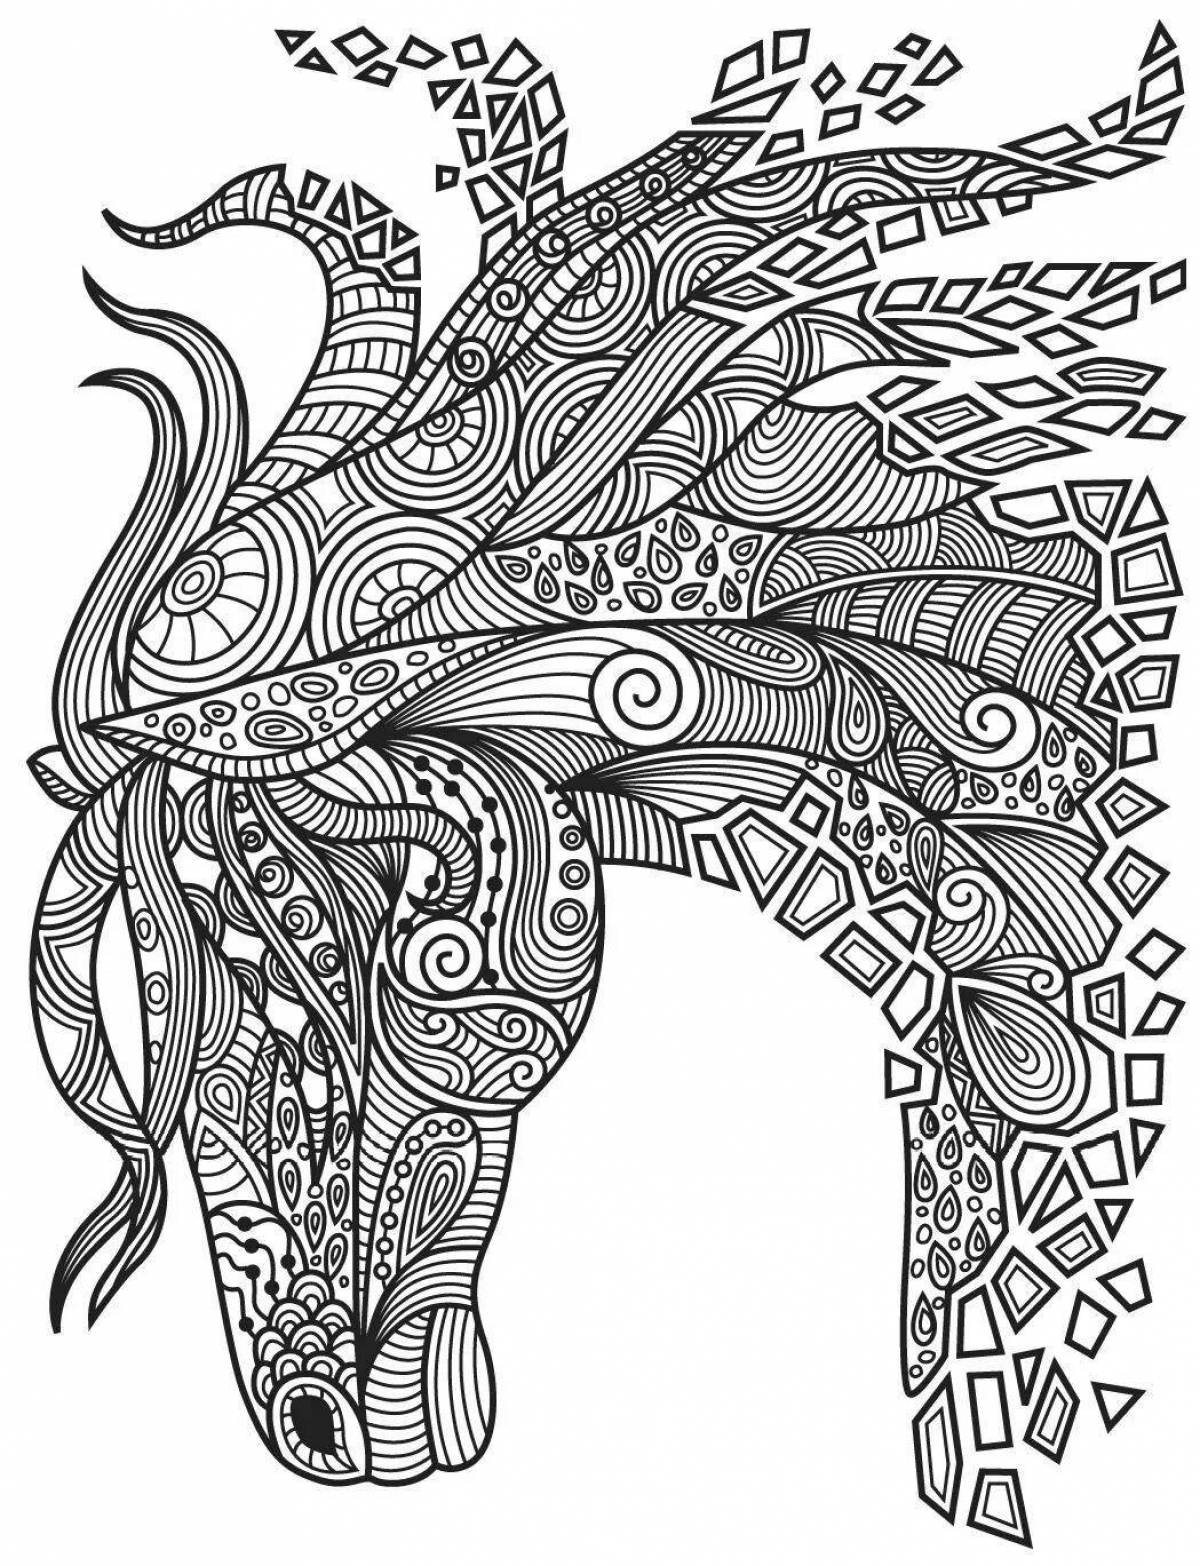 Blissful meditation coloring book